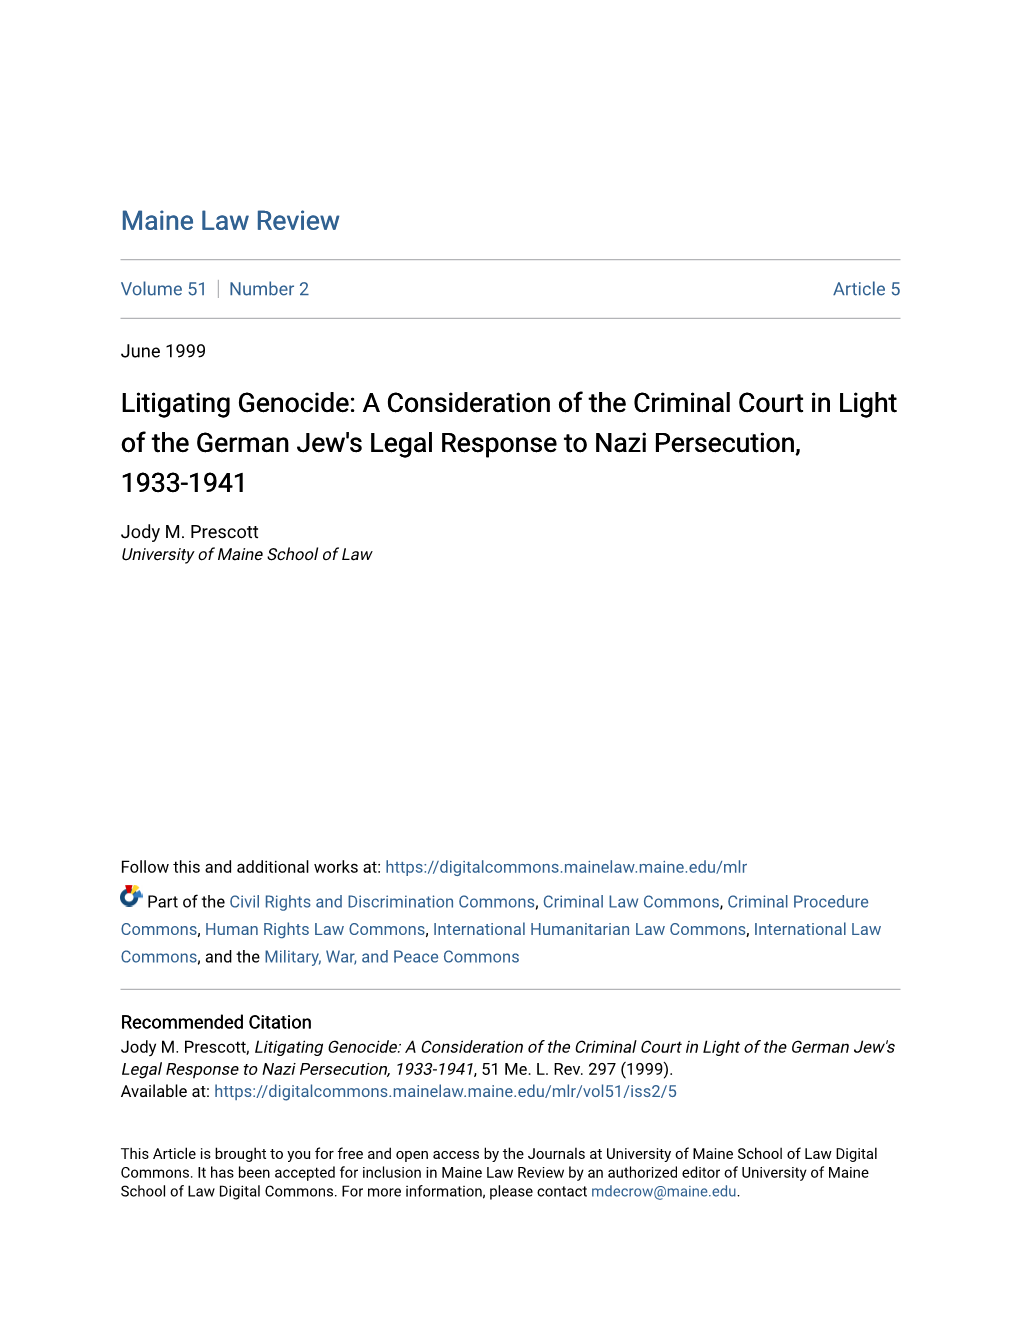 A Consideration of the Criminal Court in Light of the German Jew's Legal Response to Nazi Persecution, 1933-1941